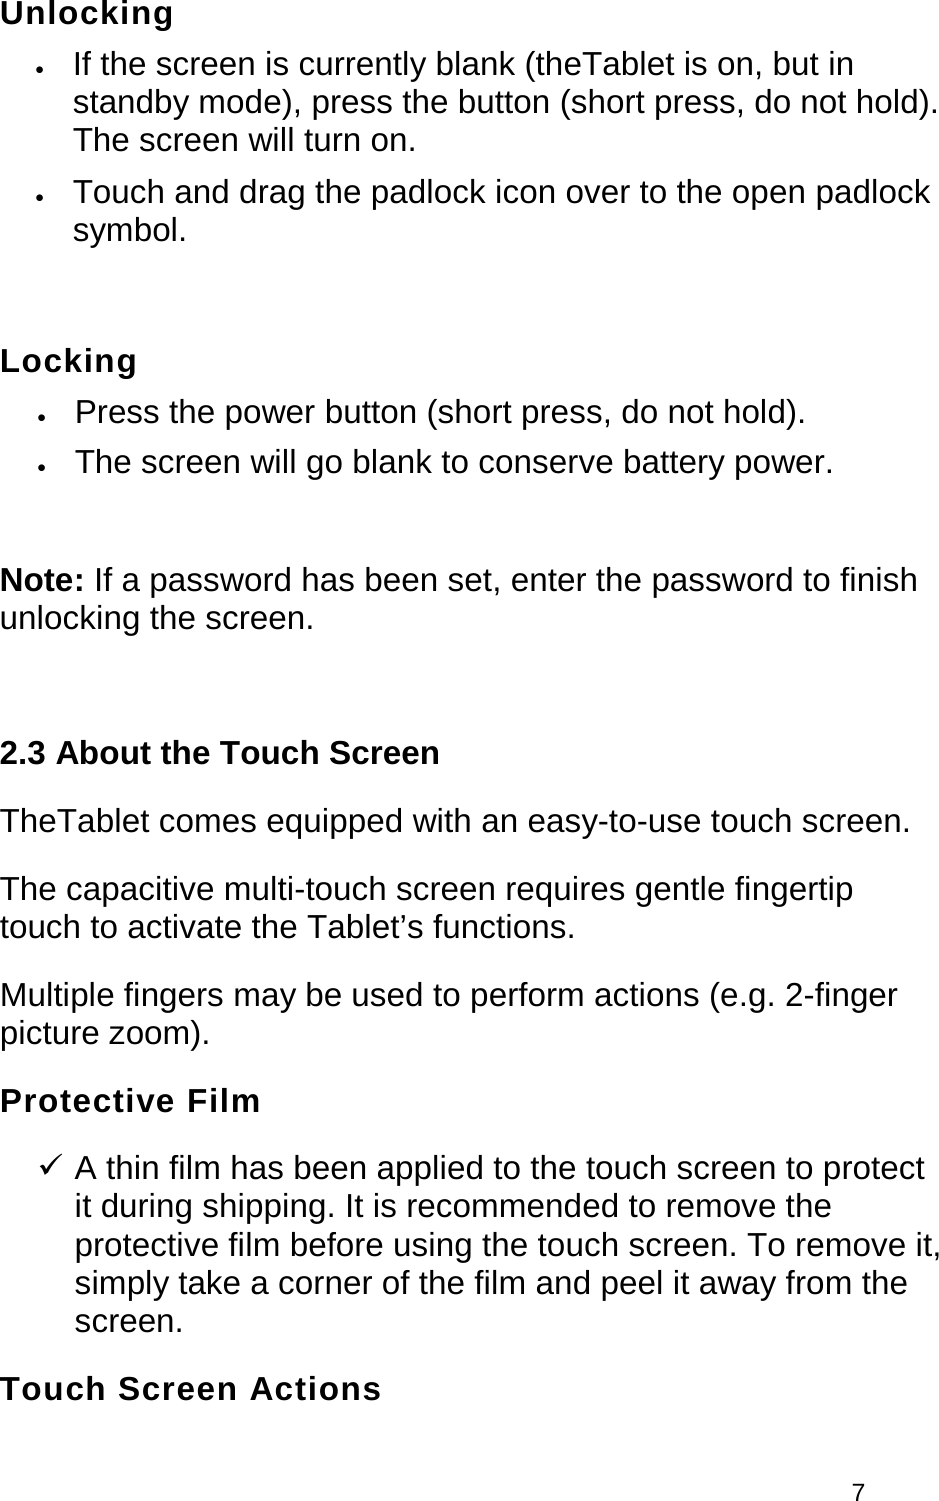  7  Unlocking • If the screen is currently blank (theTablet is on, but in standby mode), press the button (short press, do not hold). The screen will turn on.  • Touch and drag the padlock icon over to the open padlock symbol.   Locking • Press the power button (short press, do not hold).  • The screen will go blank to conserve battery power.   Note: If a password has been set, enter the password to finish unlocking the screen.   2.3 About the Touch Screen TheTablet comes equipped with an easy-to-use touch screen. The capacitive multi-touch screen requires gentle fingertip touch to activate the Tablet’s functions.  Multiple fingers may be used to perform actions (e.g. 2-finger picture zoom). Protective Film  A thin film has been applied to the touch screen to protect it during shipping. It is recommended to remove the protective film before using the touch screen. To remove it, simply take a corner of the film and peel it away from the screen. Touch Screen Actions 